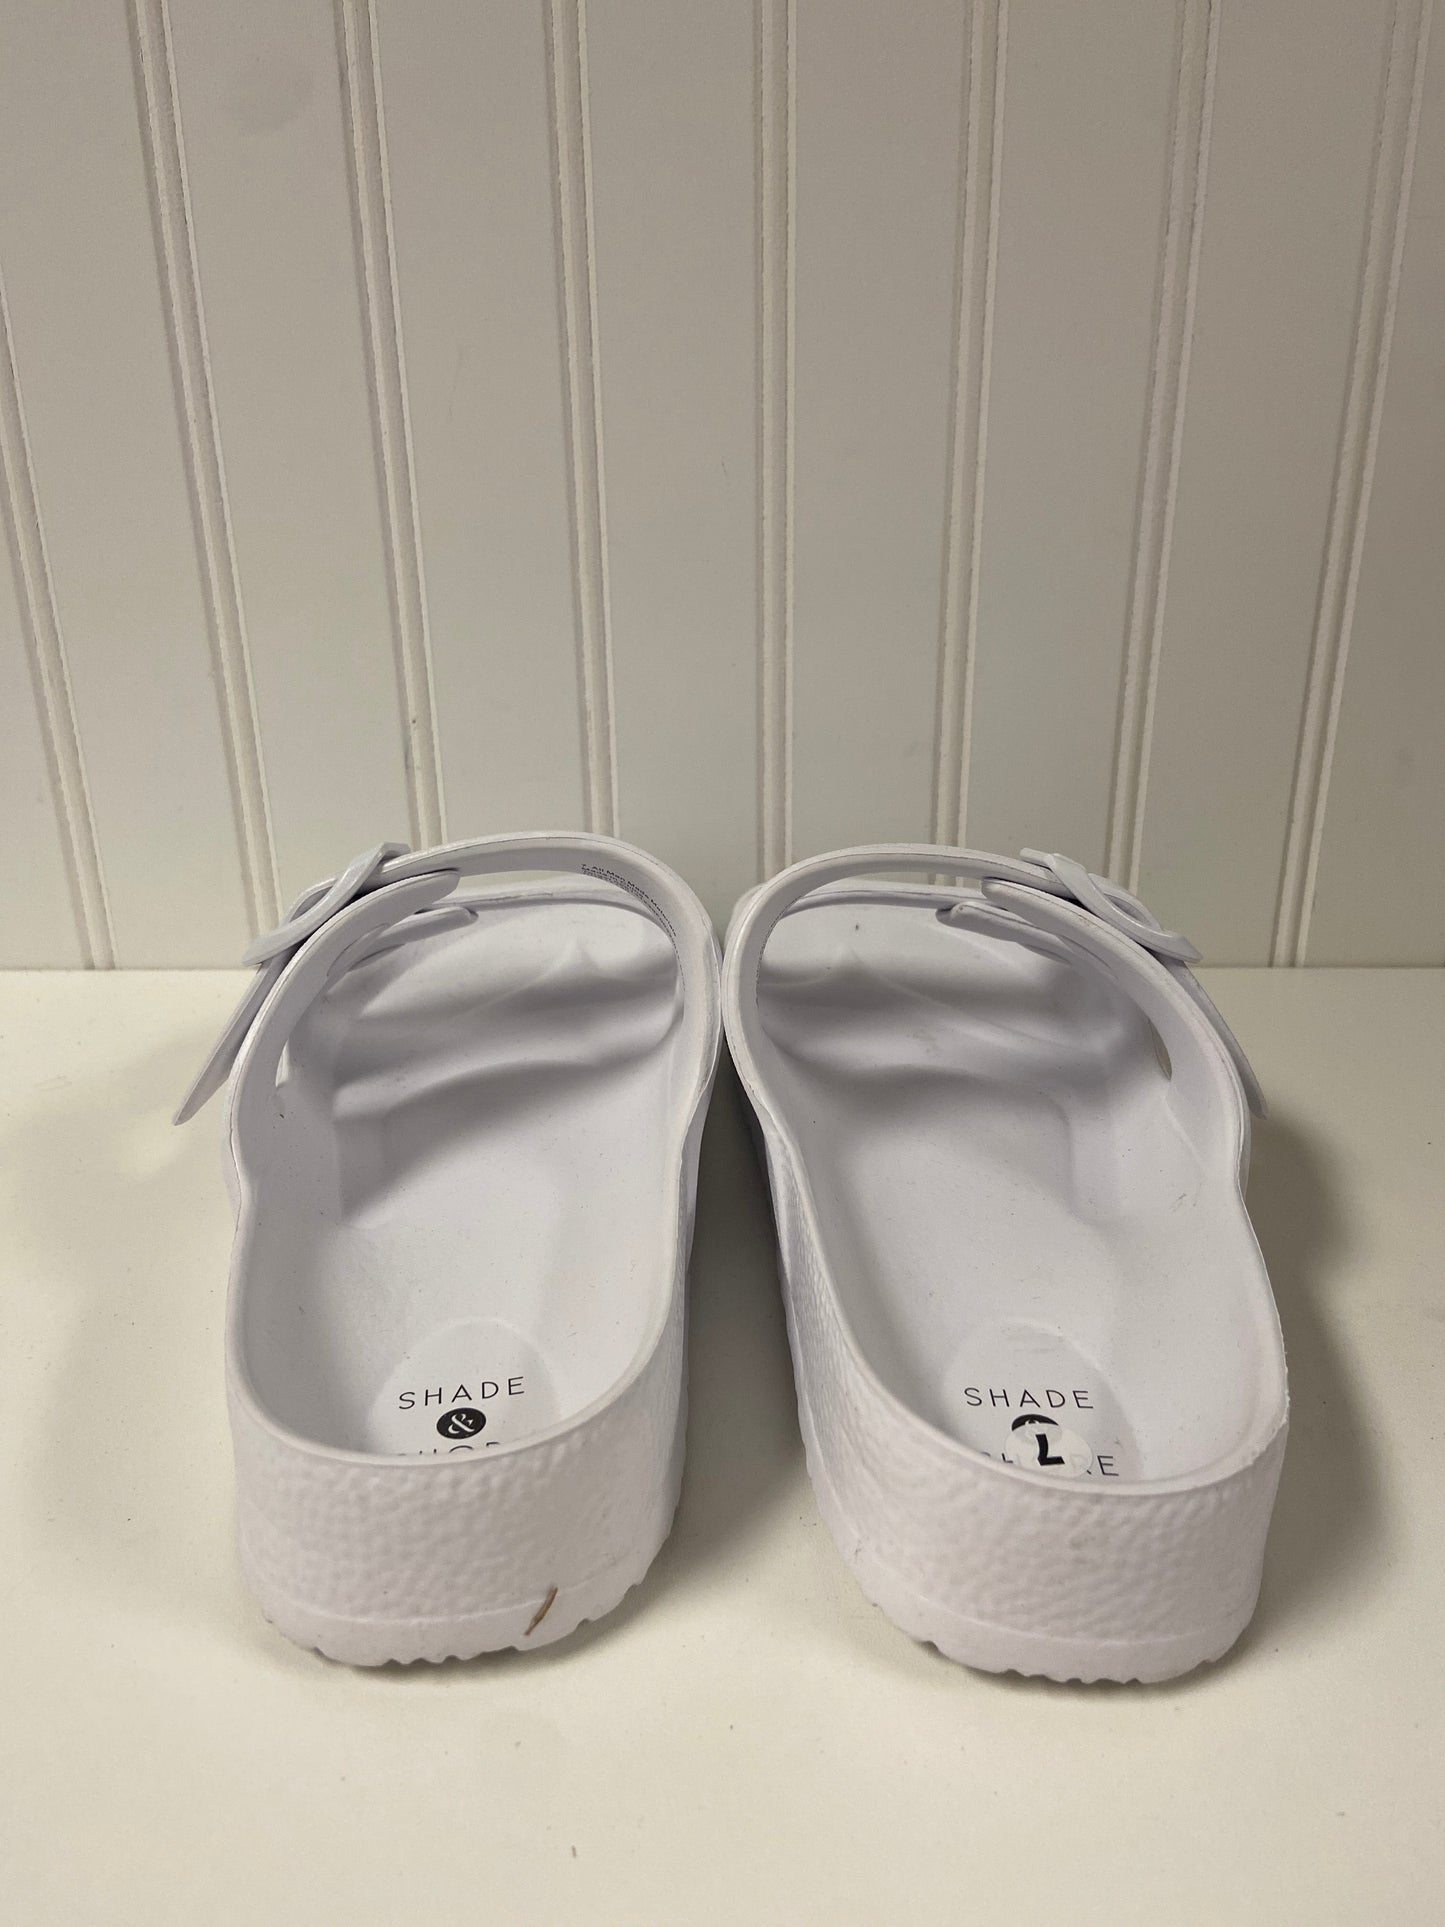 White Sandals Flats Shade & Shore, Size 7